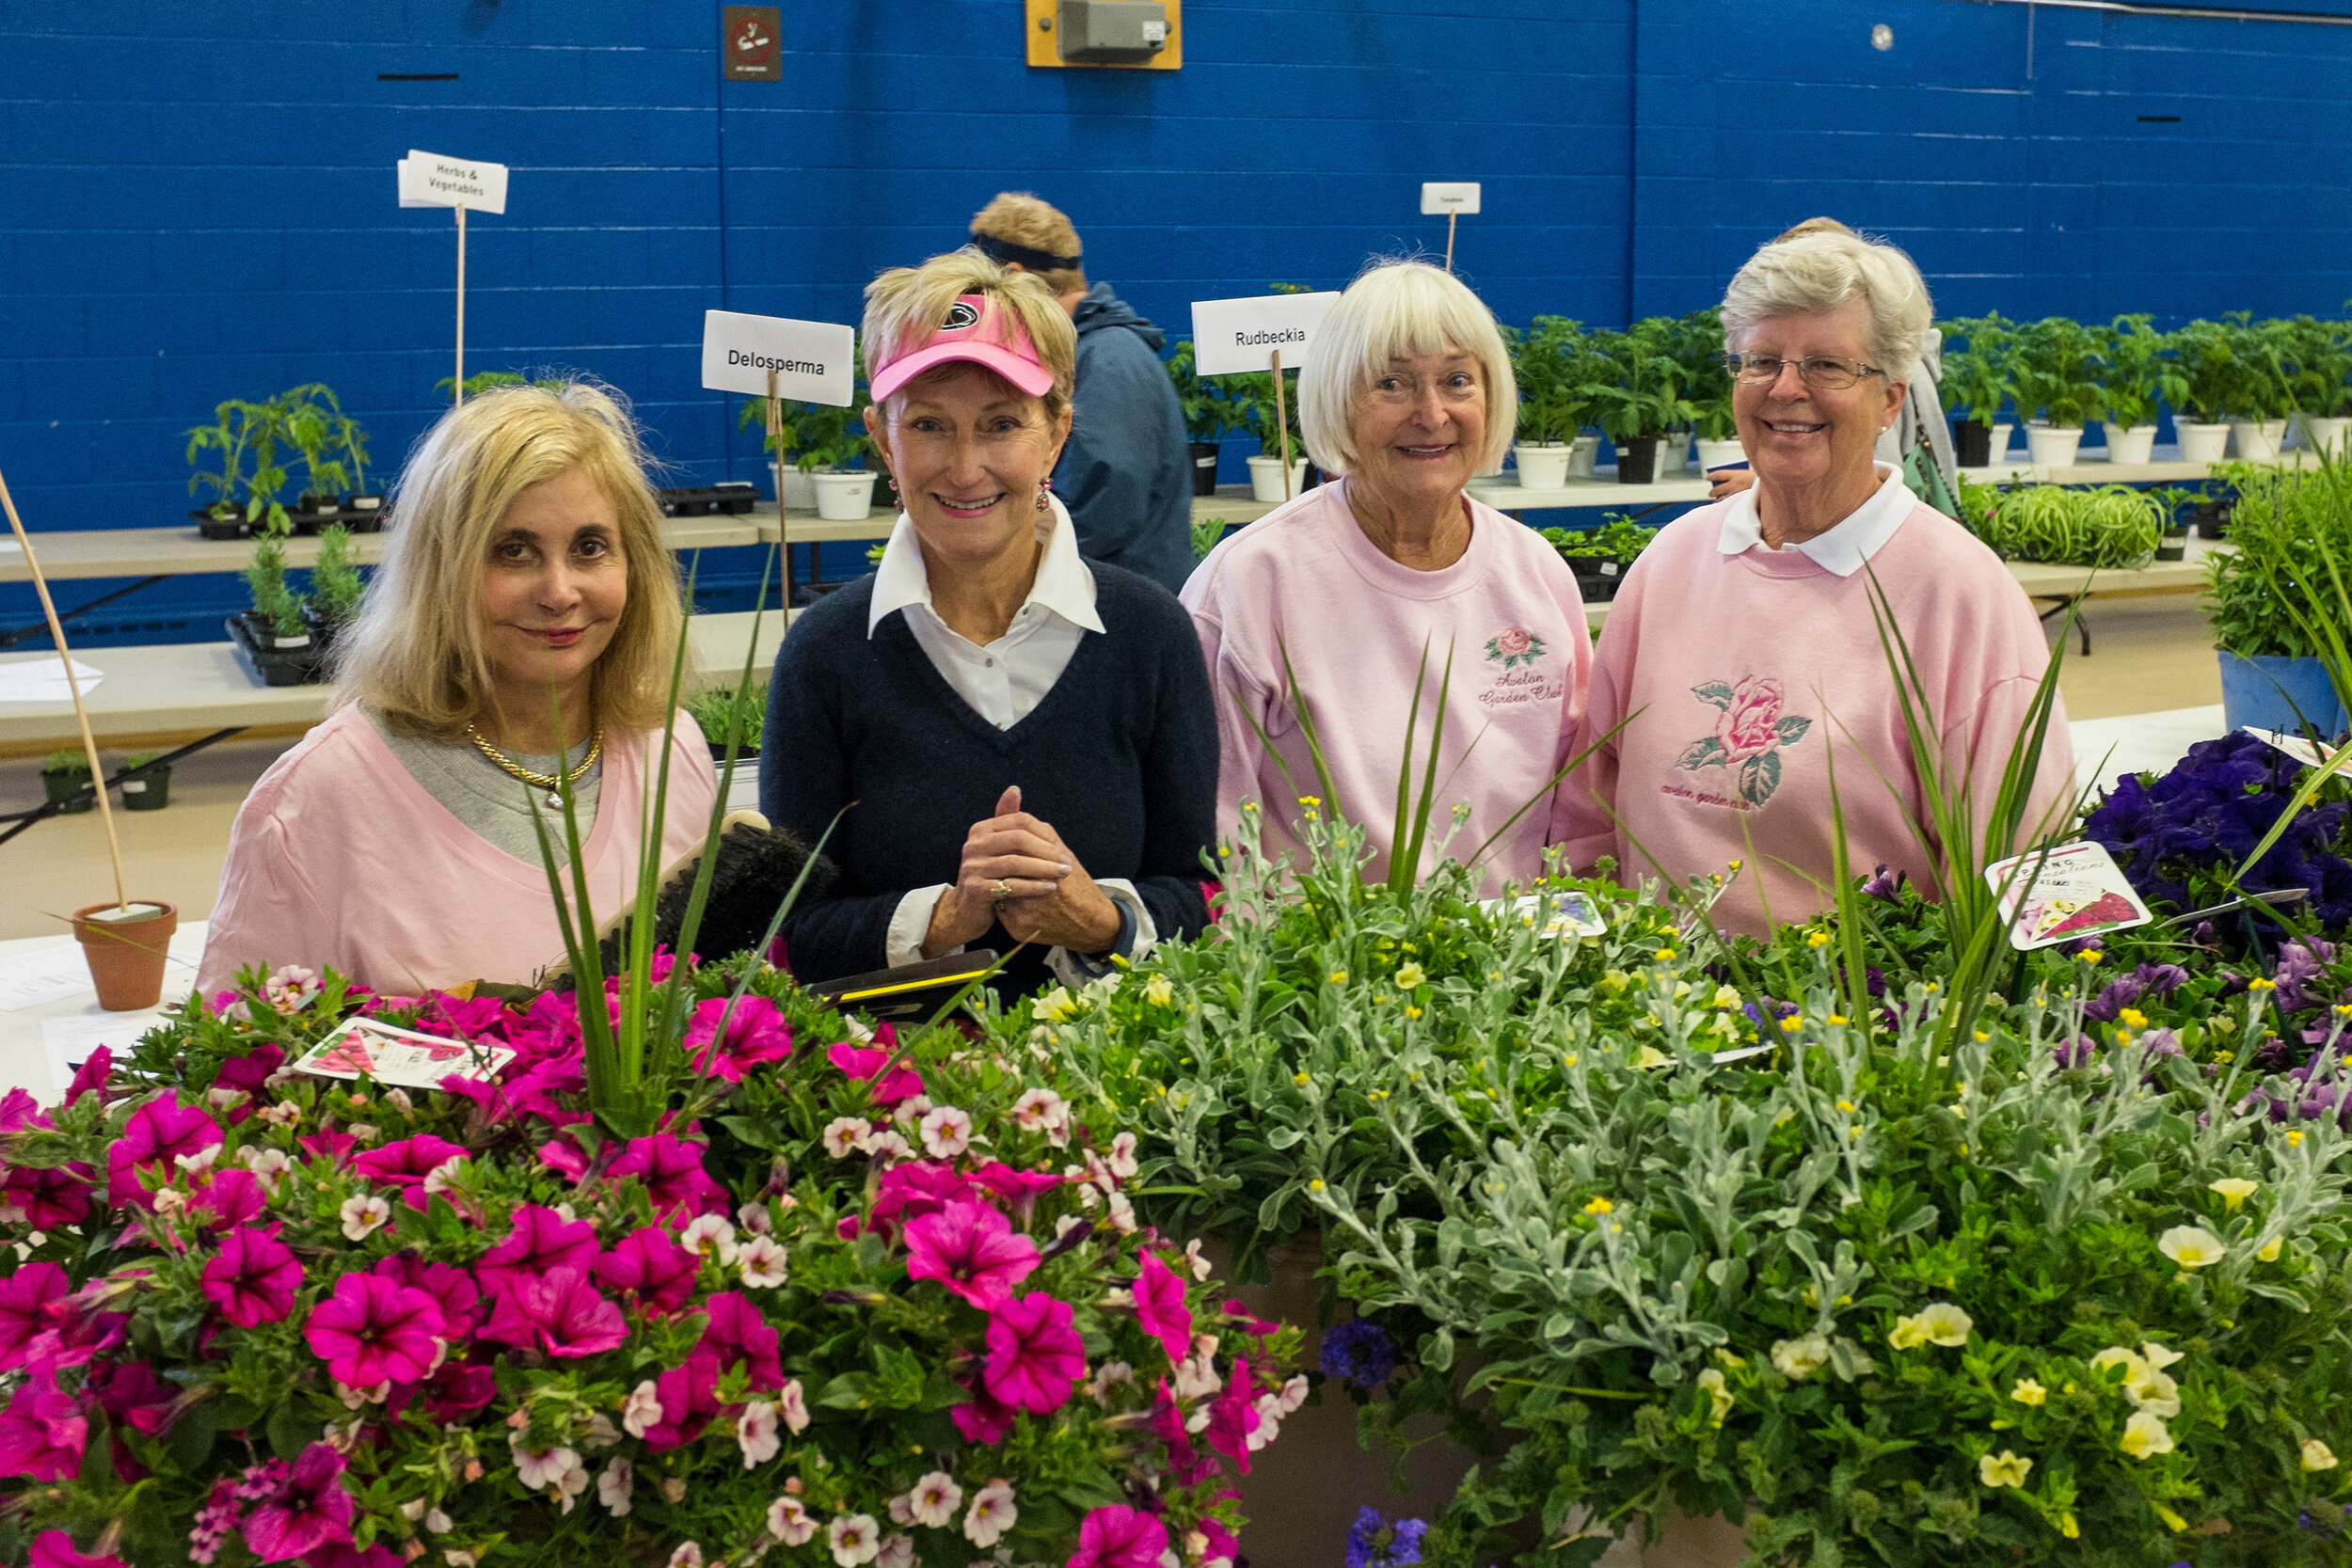 Avalon Garden Club Members- Babs DeLorey, Peggy Grass, Judi Trimble, and Serena Smith at the annual Plant Sale.